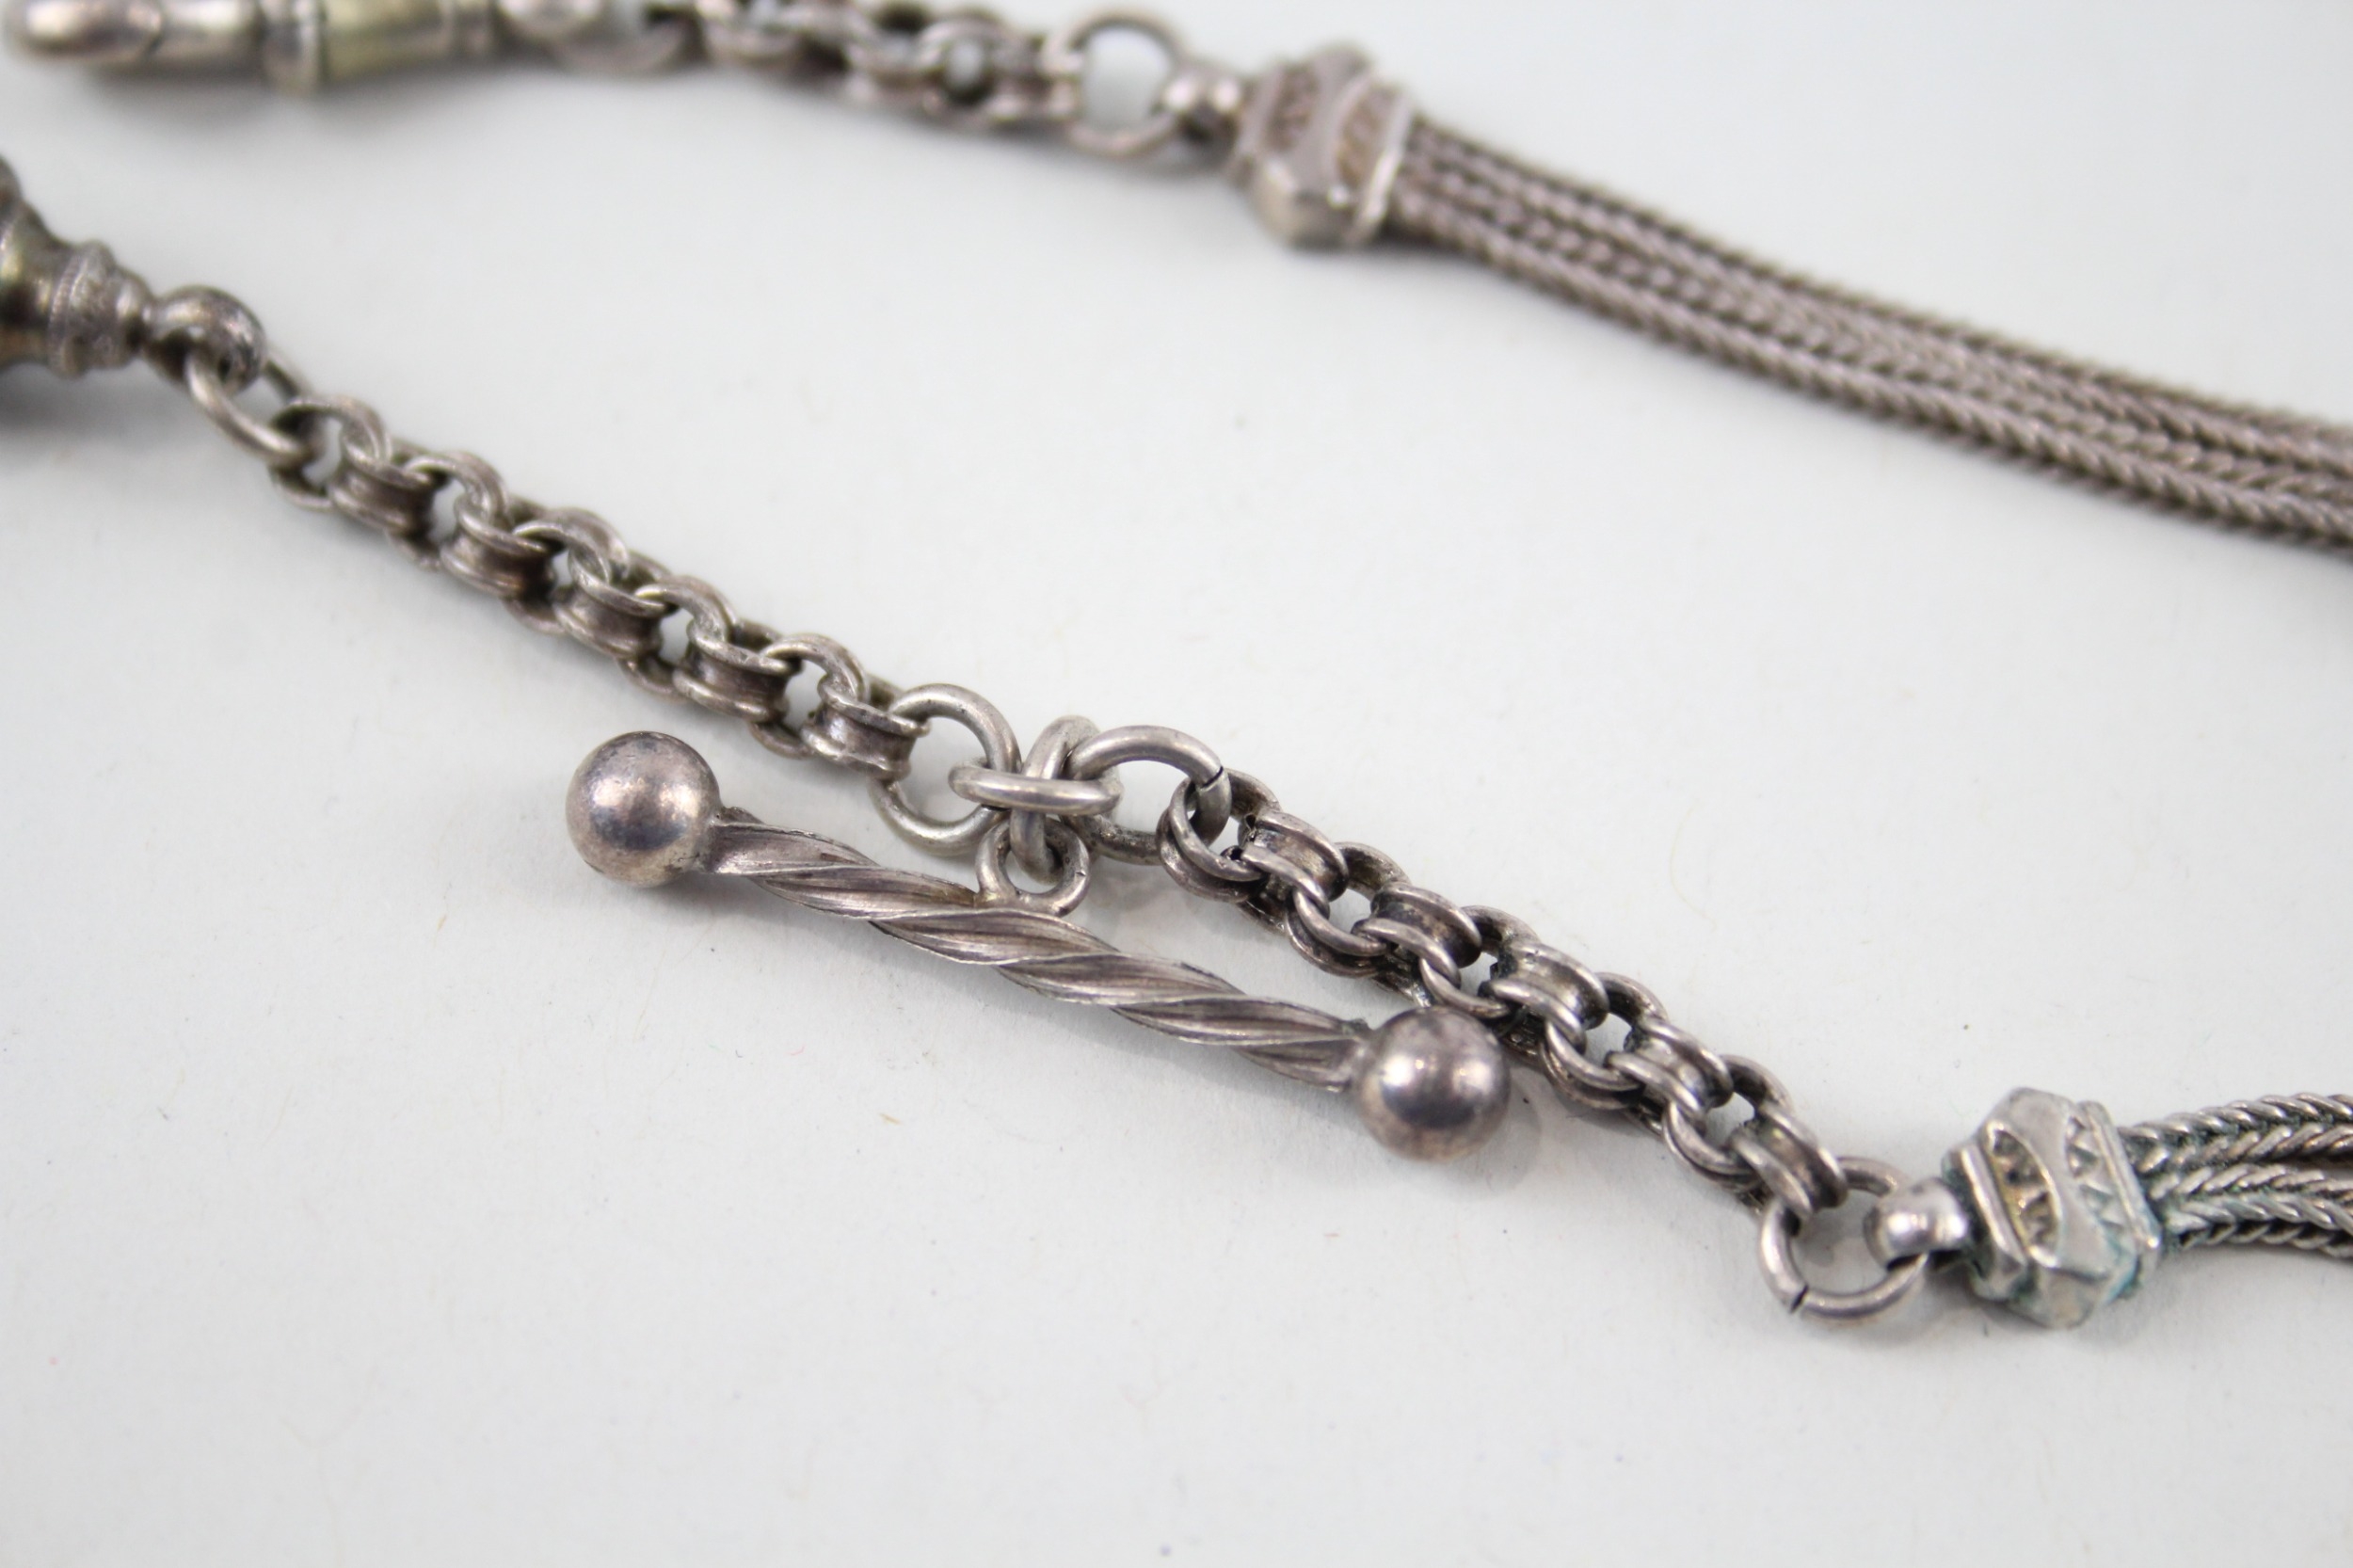 Silver antique Albertina chain with tassel (11g) - Image 3 of 4